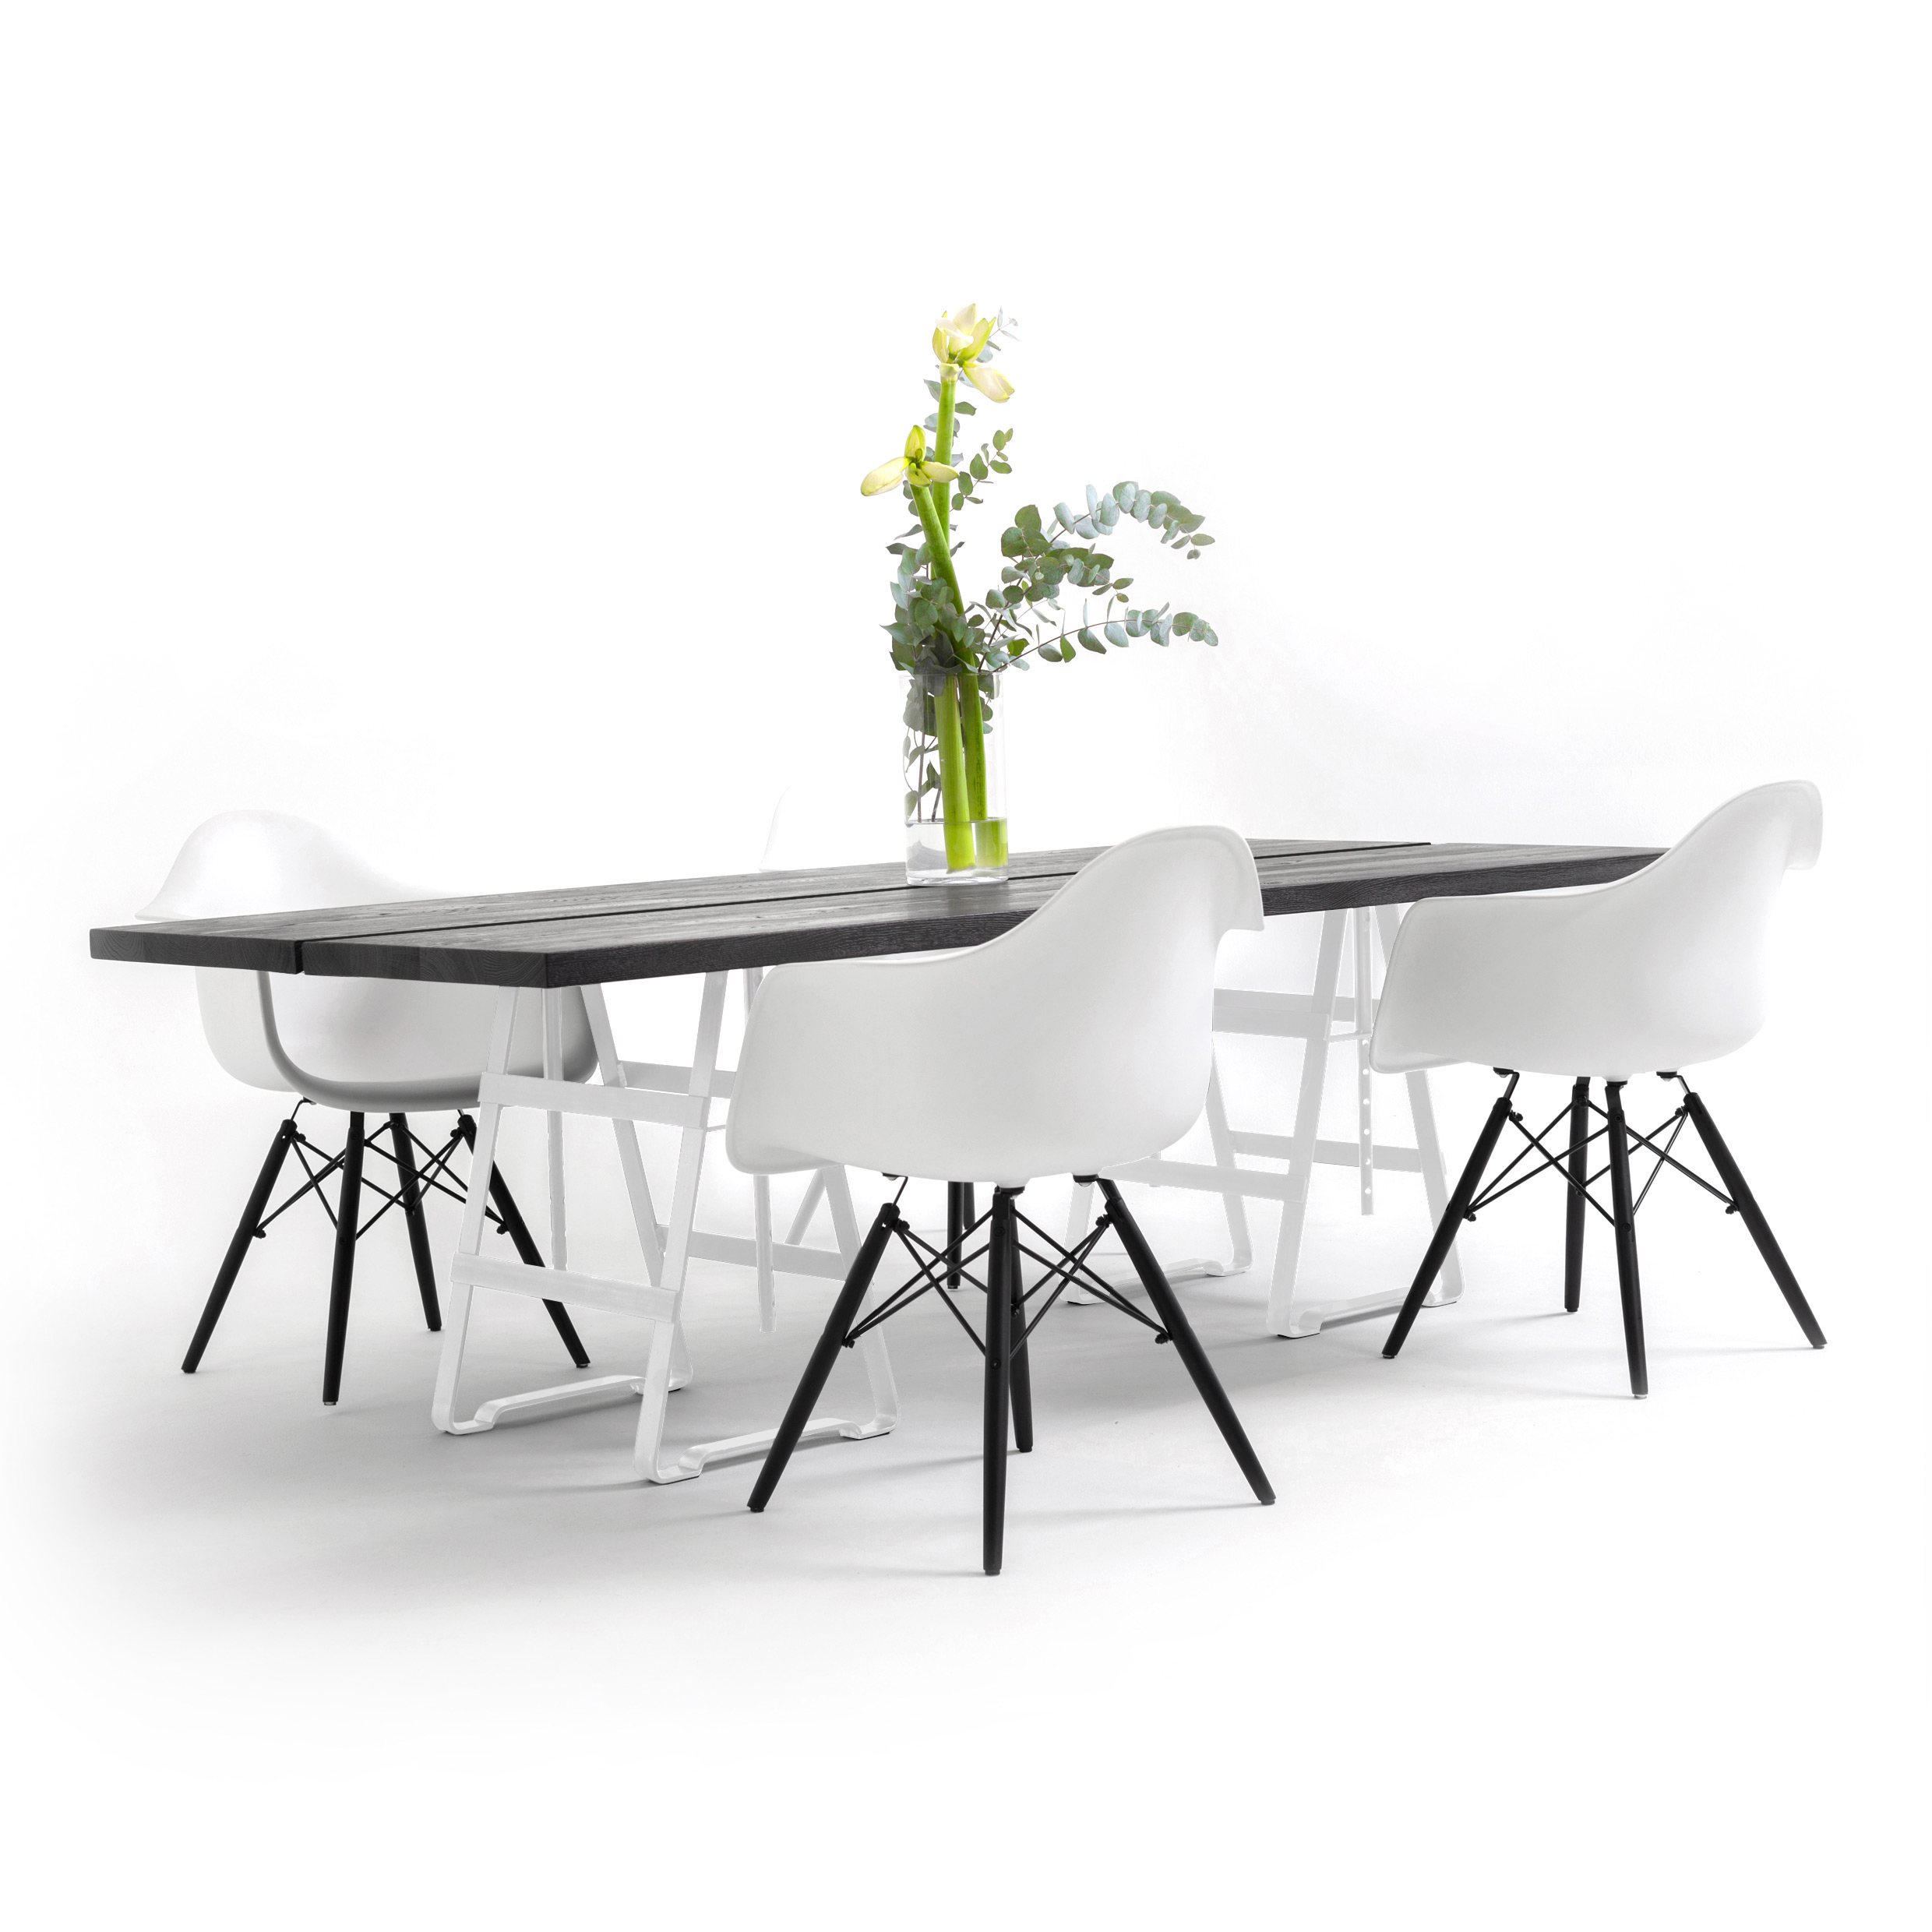 FORM EXCLUSIVE // JOON - IN-/OUTDOOR TABLE | BLACK CARED - 240CM X 45CM X 5CM - PAINT MONKEY WHITE